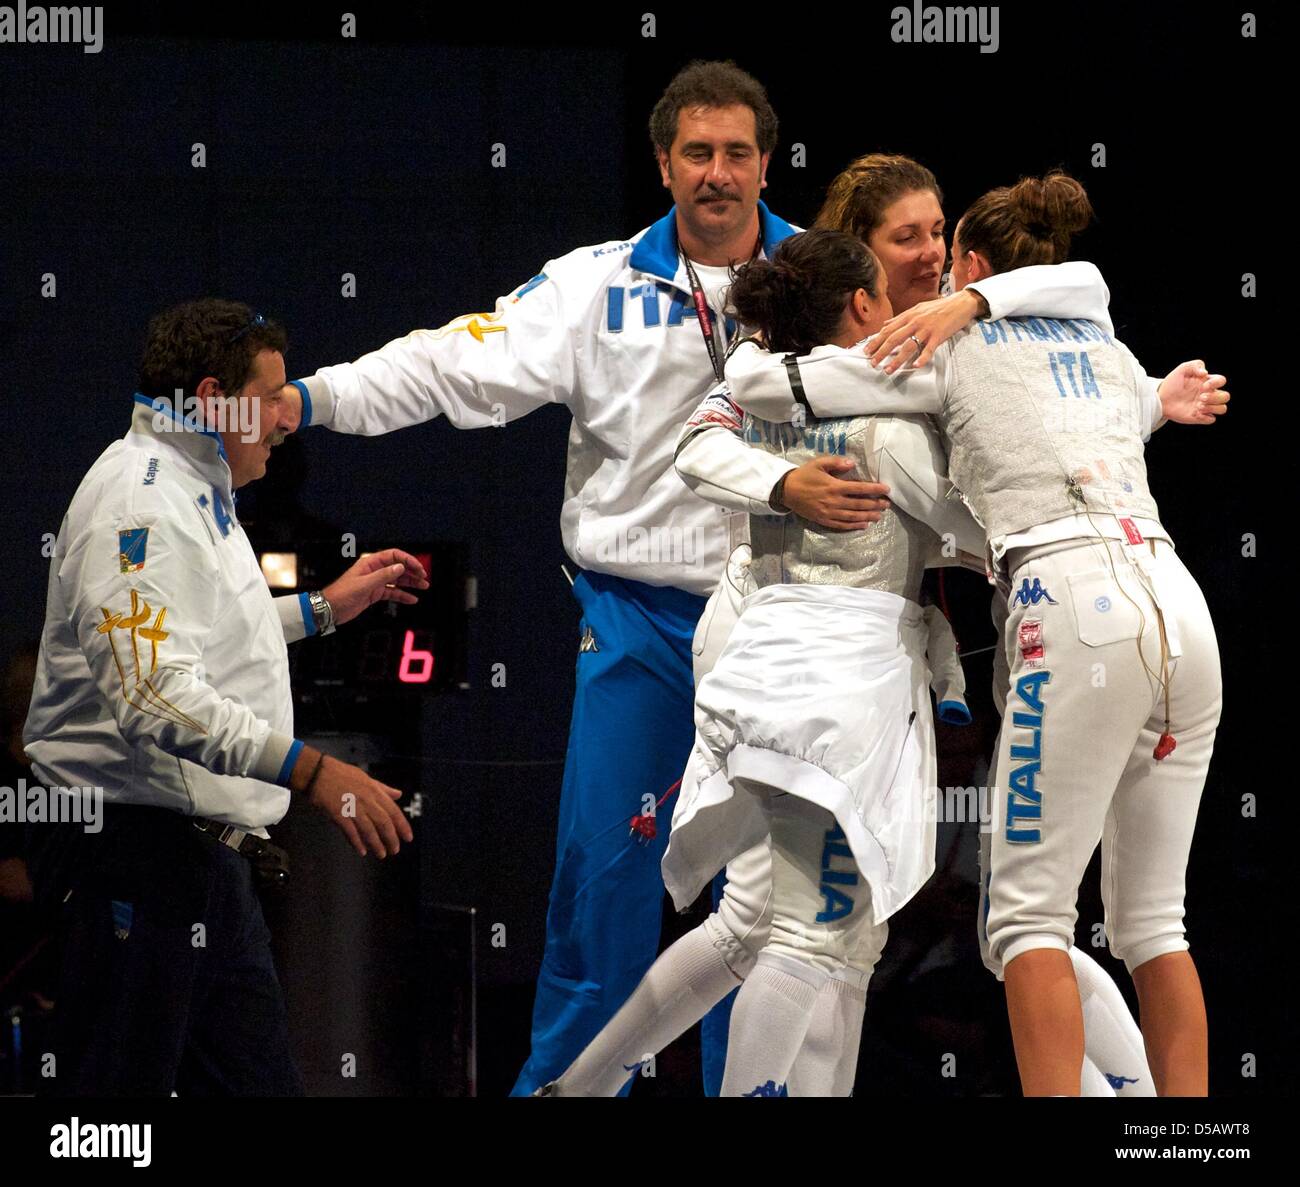 Next to their coaches Giulio Tomassini (L-R) and Stefano Cerioni, foil  fencers Ilaria Salvatori, Arianna Errigo and Elisa Di Francisca hug after  the fight against the German team at the European Fencing